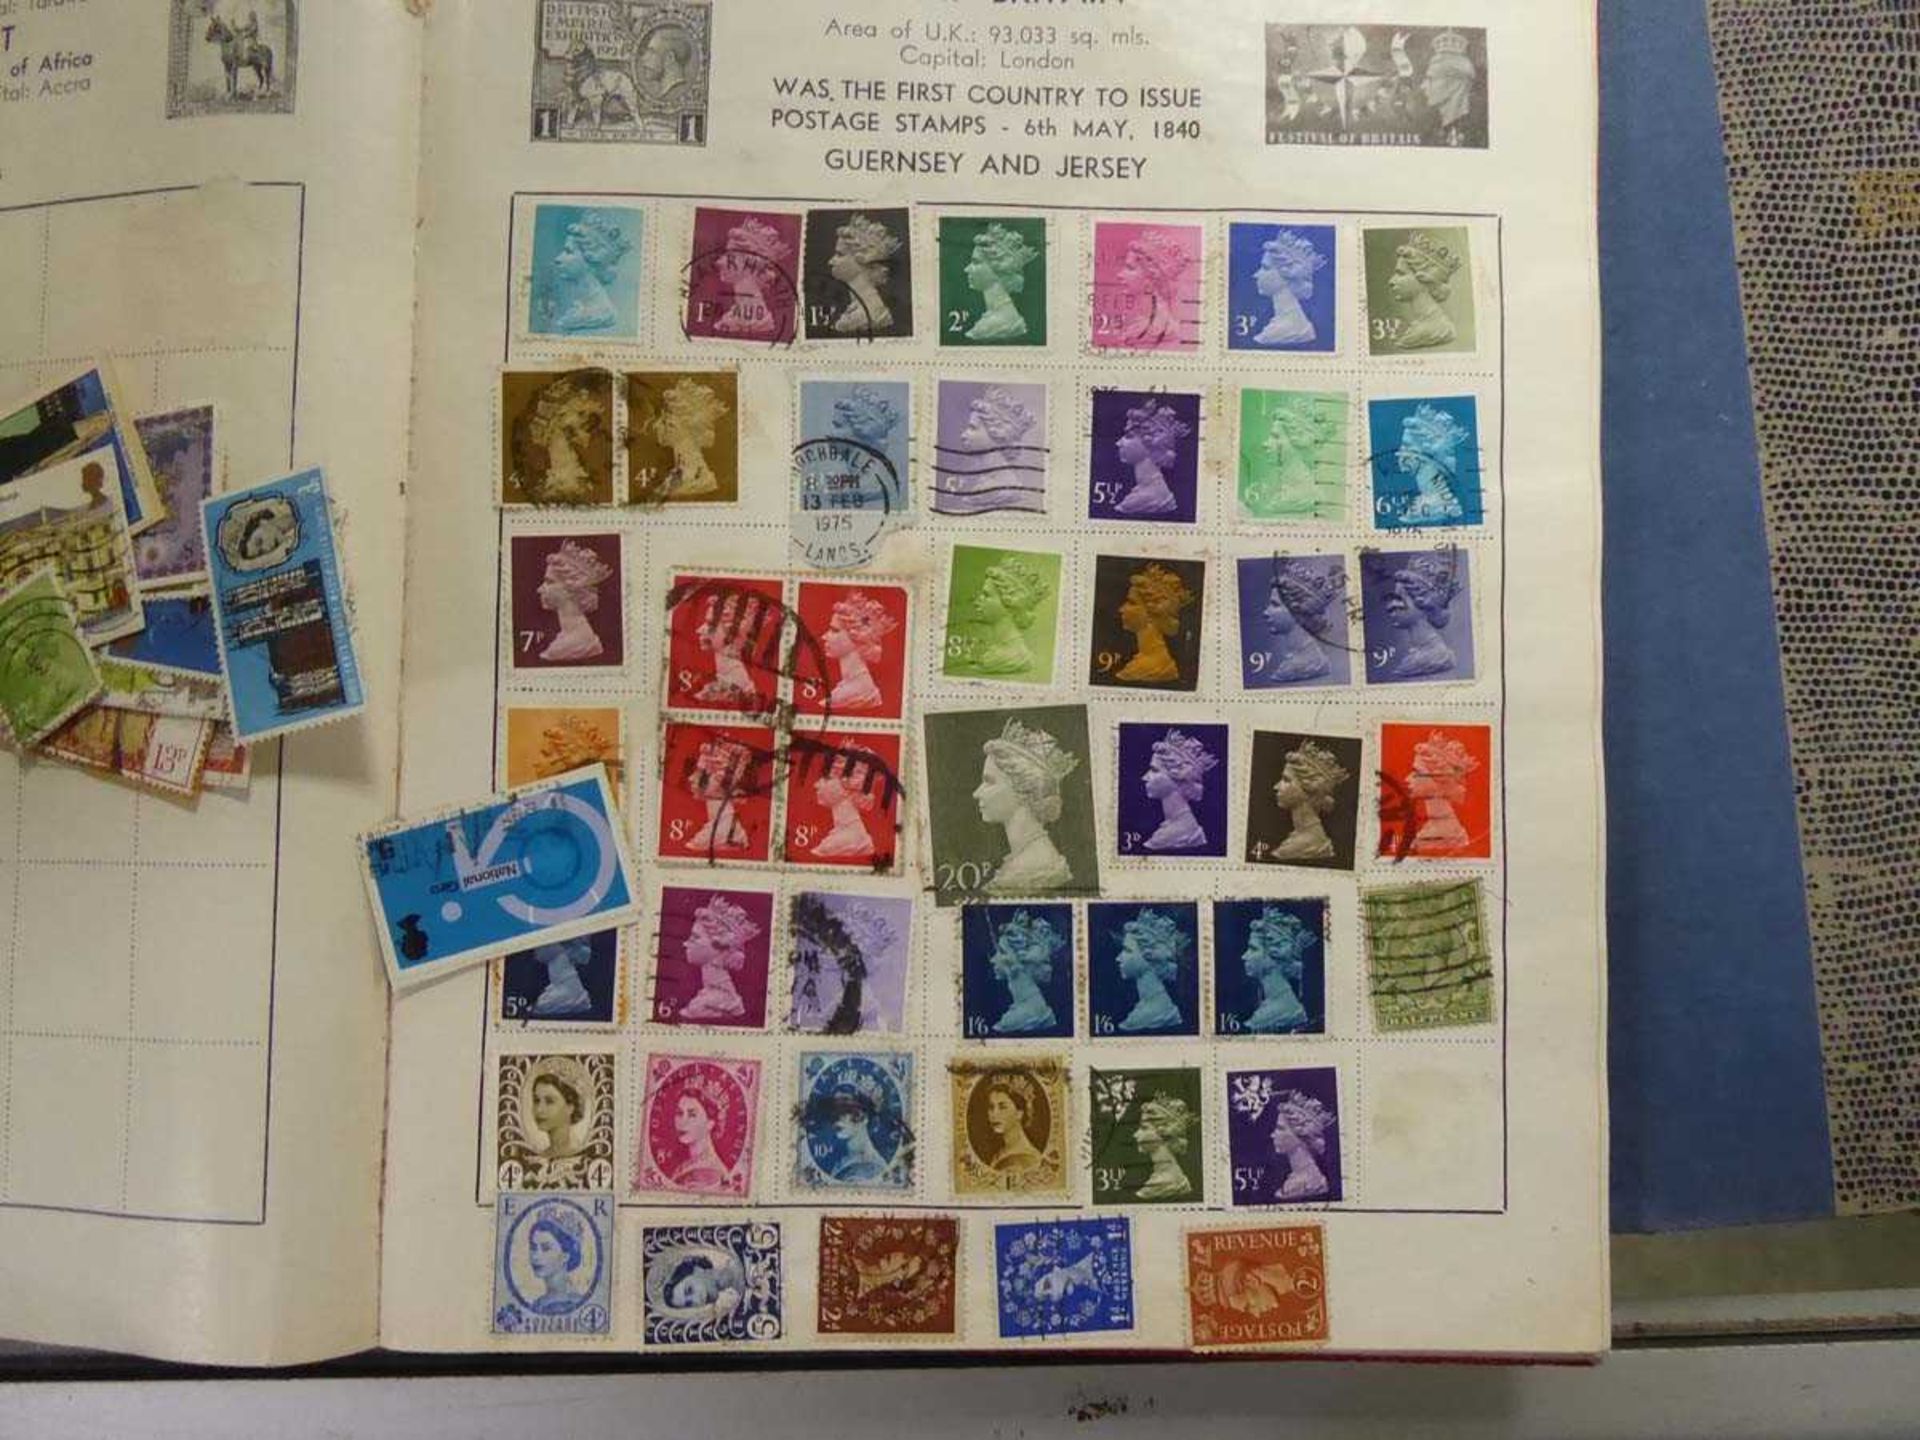 Box containing various stamp albums with various worldwide stamps including a German stockbook album - Image 2 of 2